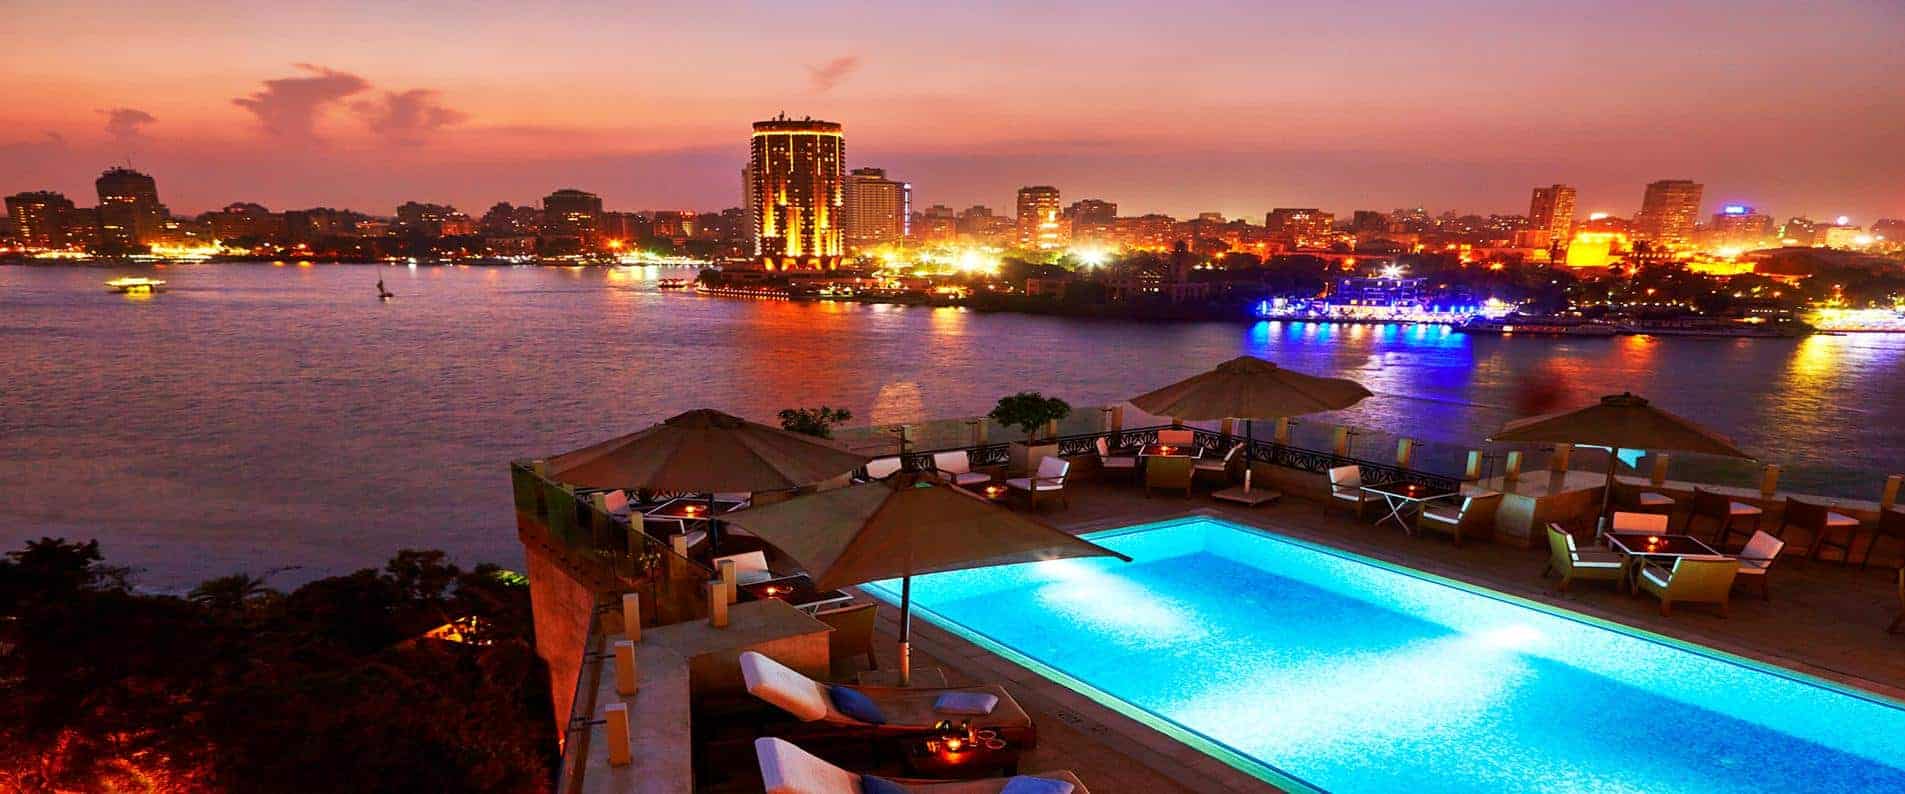 Kempinski Nile is such an amazing hotel in downtown Cairo - Photo Credit Kempinski Nile